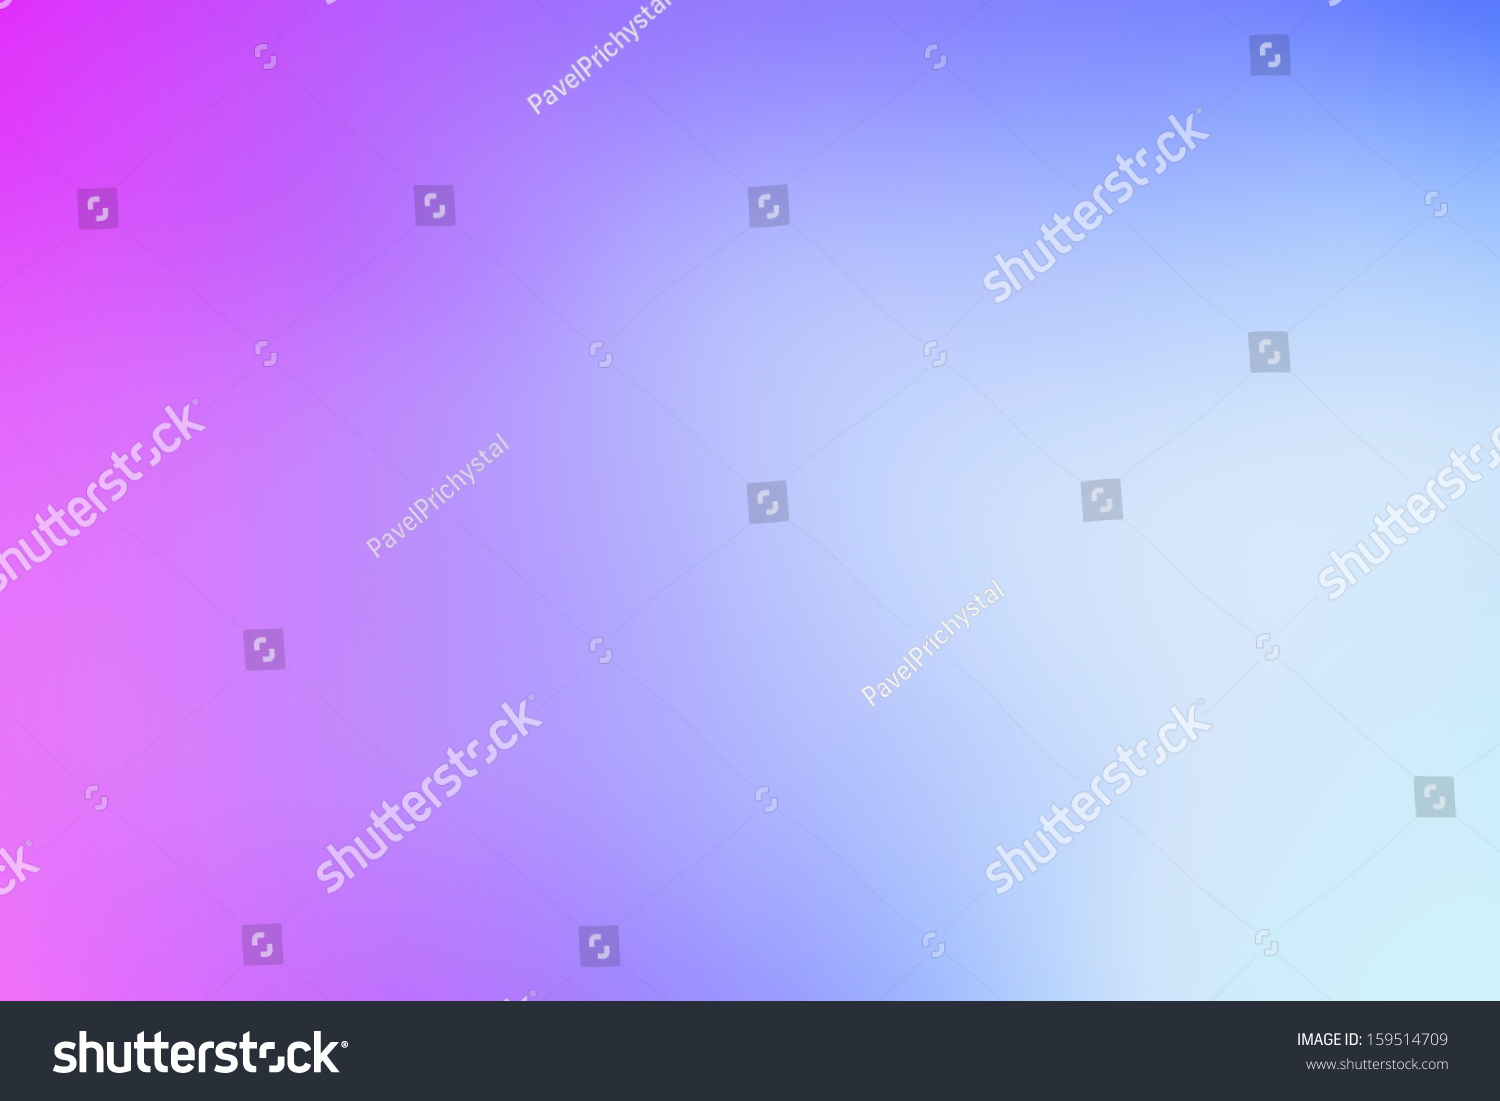 Colorful multi colored de-focused abstract photo blur background #159514709